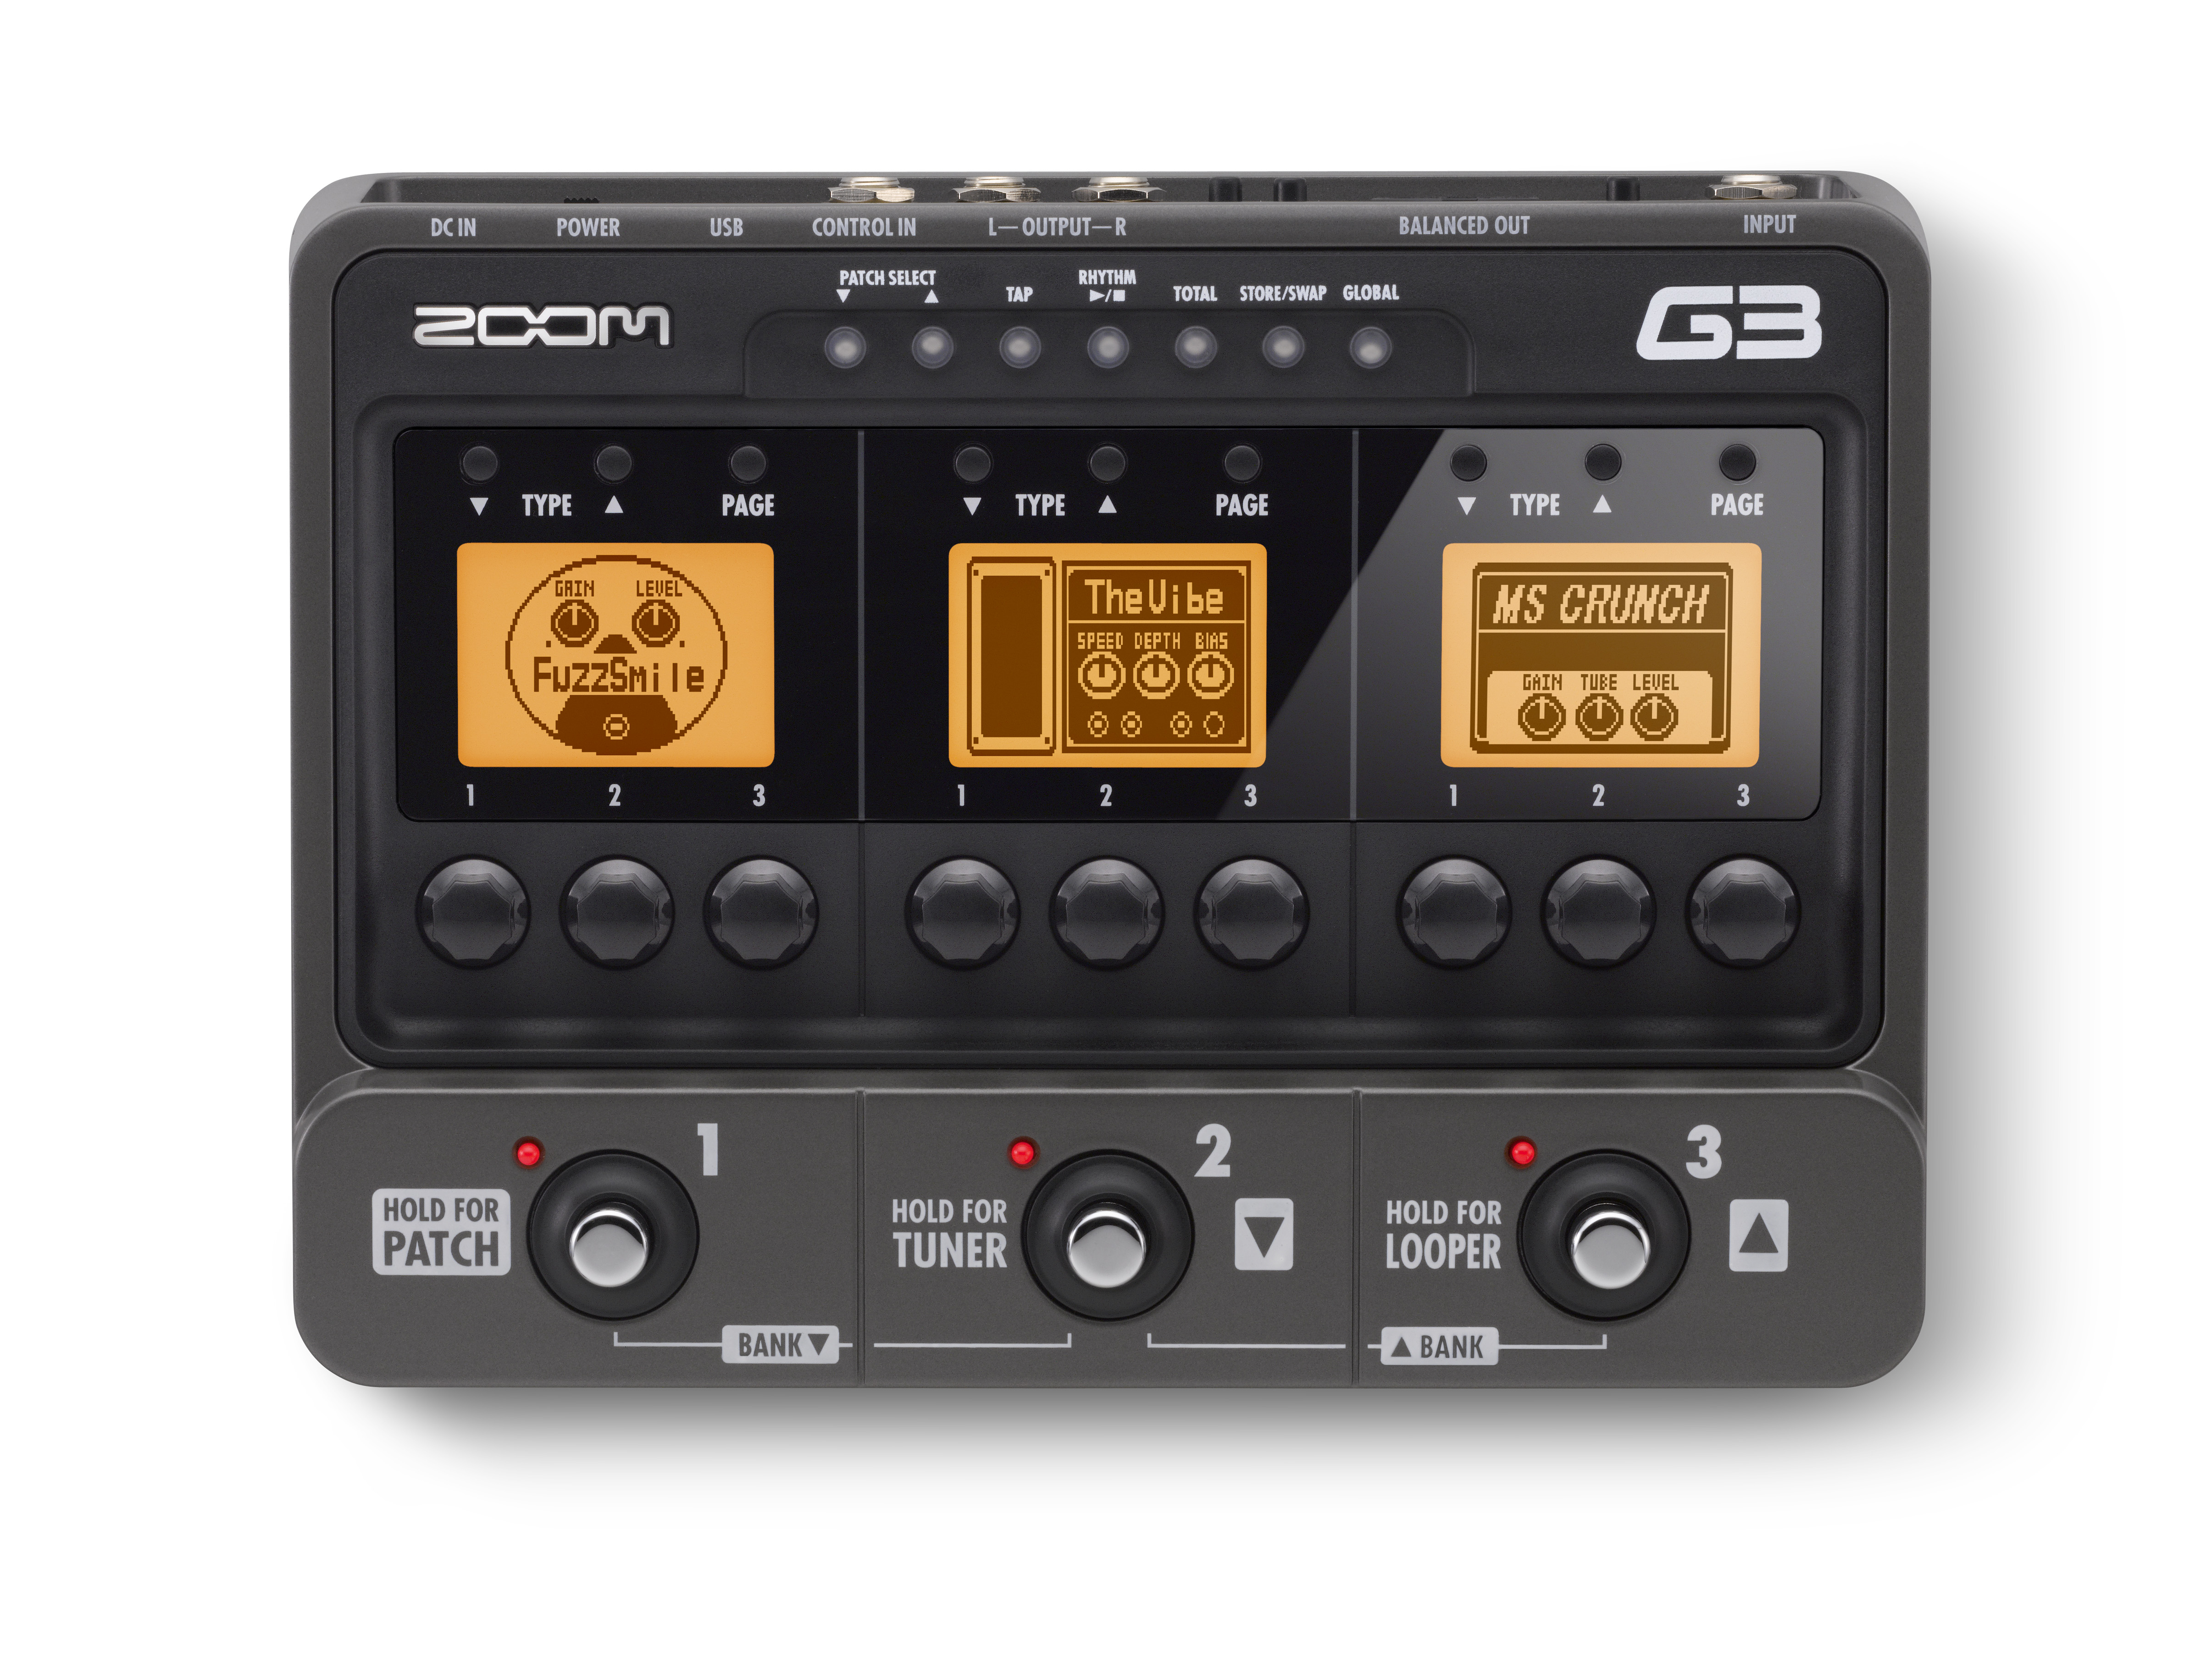 G3 Guitar Effects & Amp Simulator Pedal | Zoom